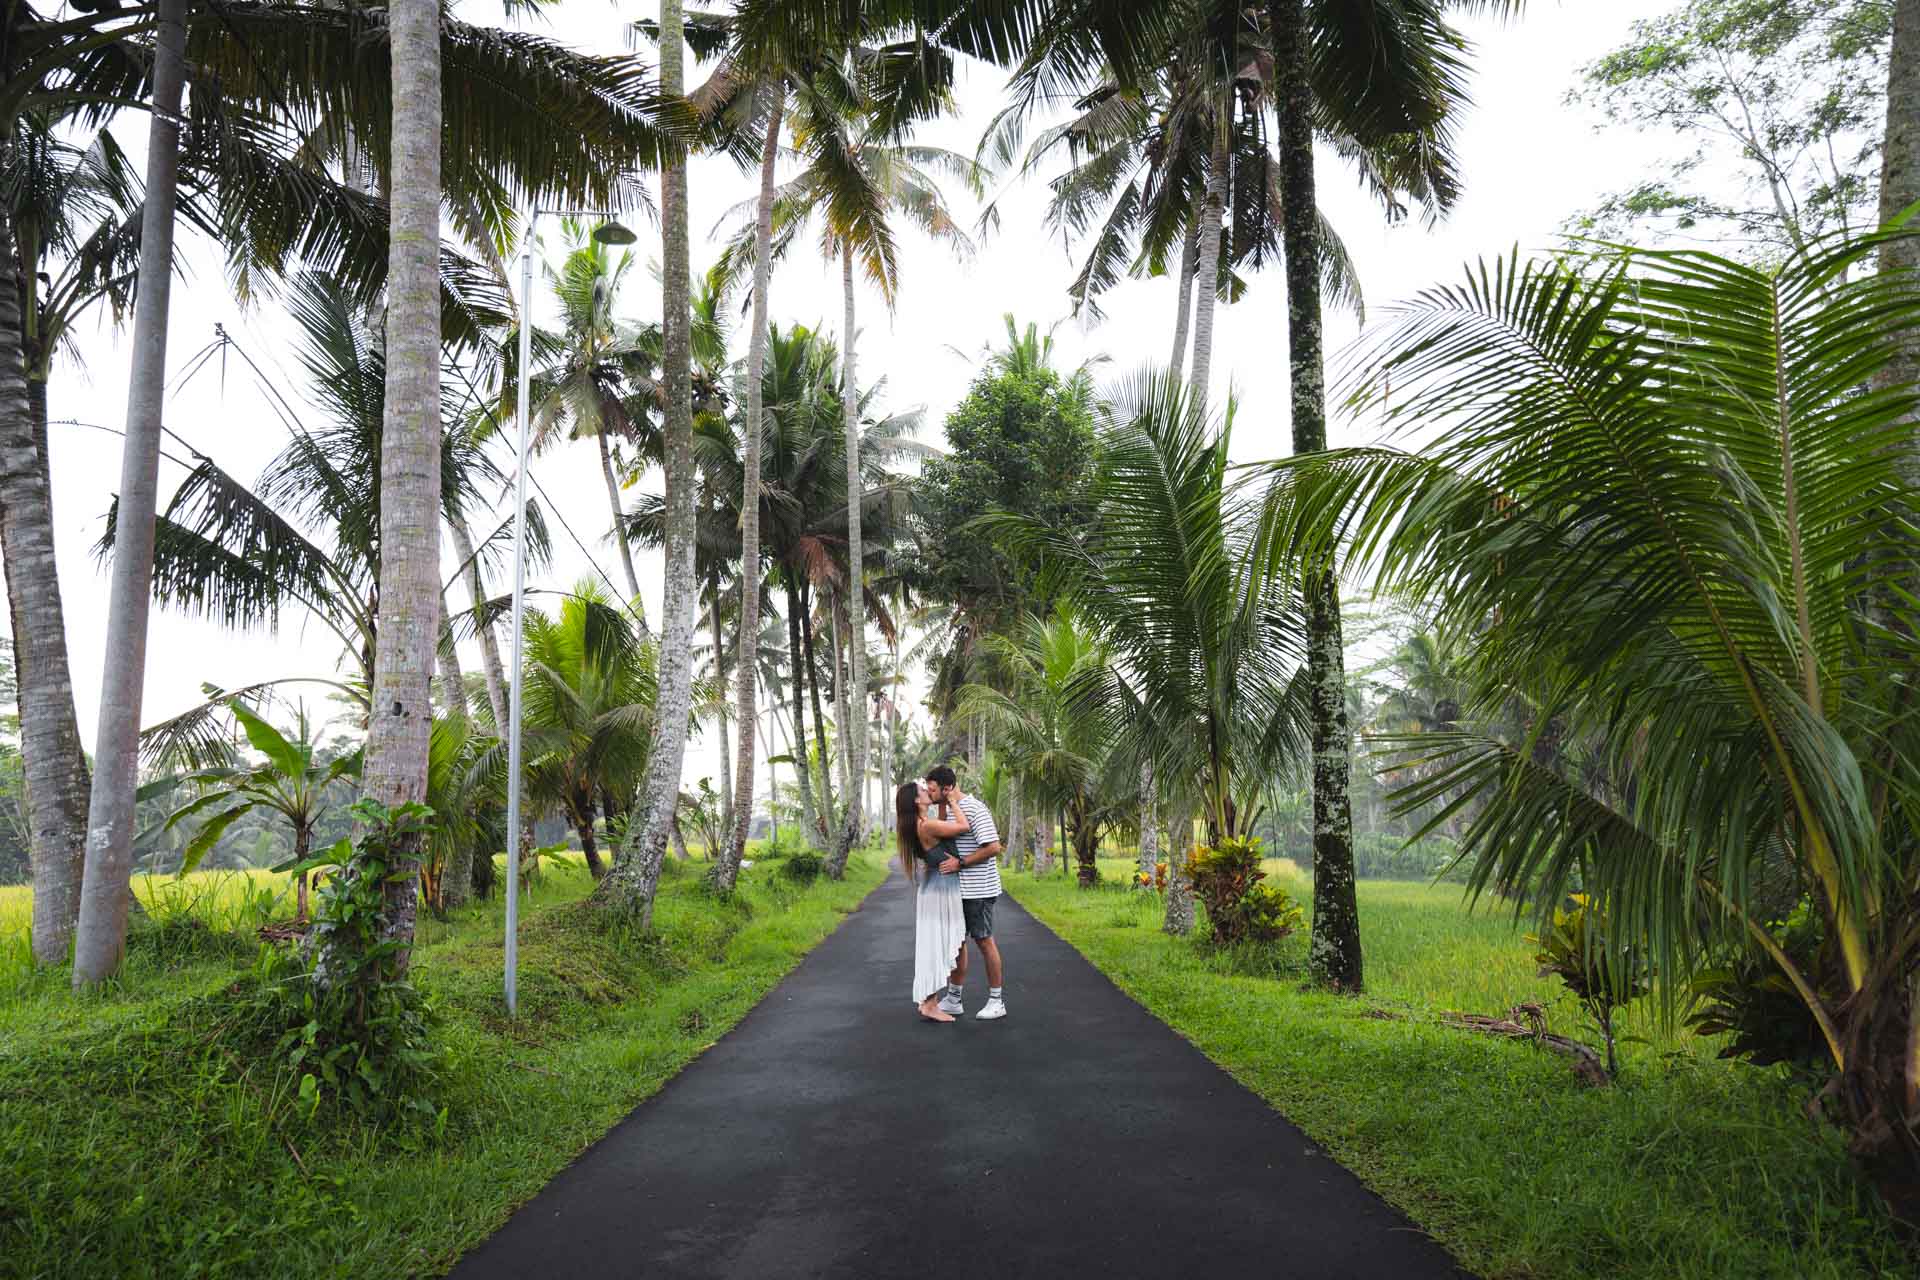 Sara and Ryan kissing on a road lined with palm trees in Bali.